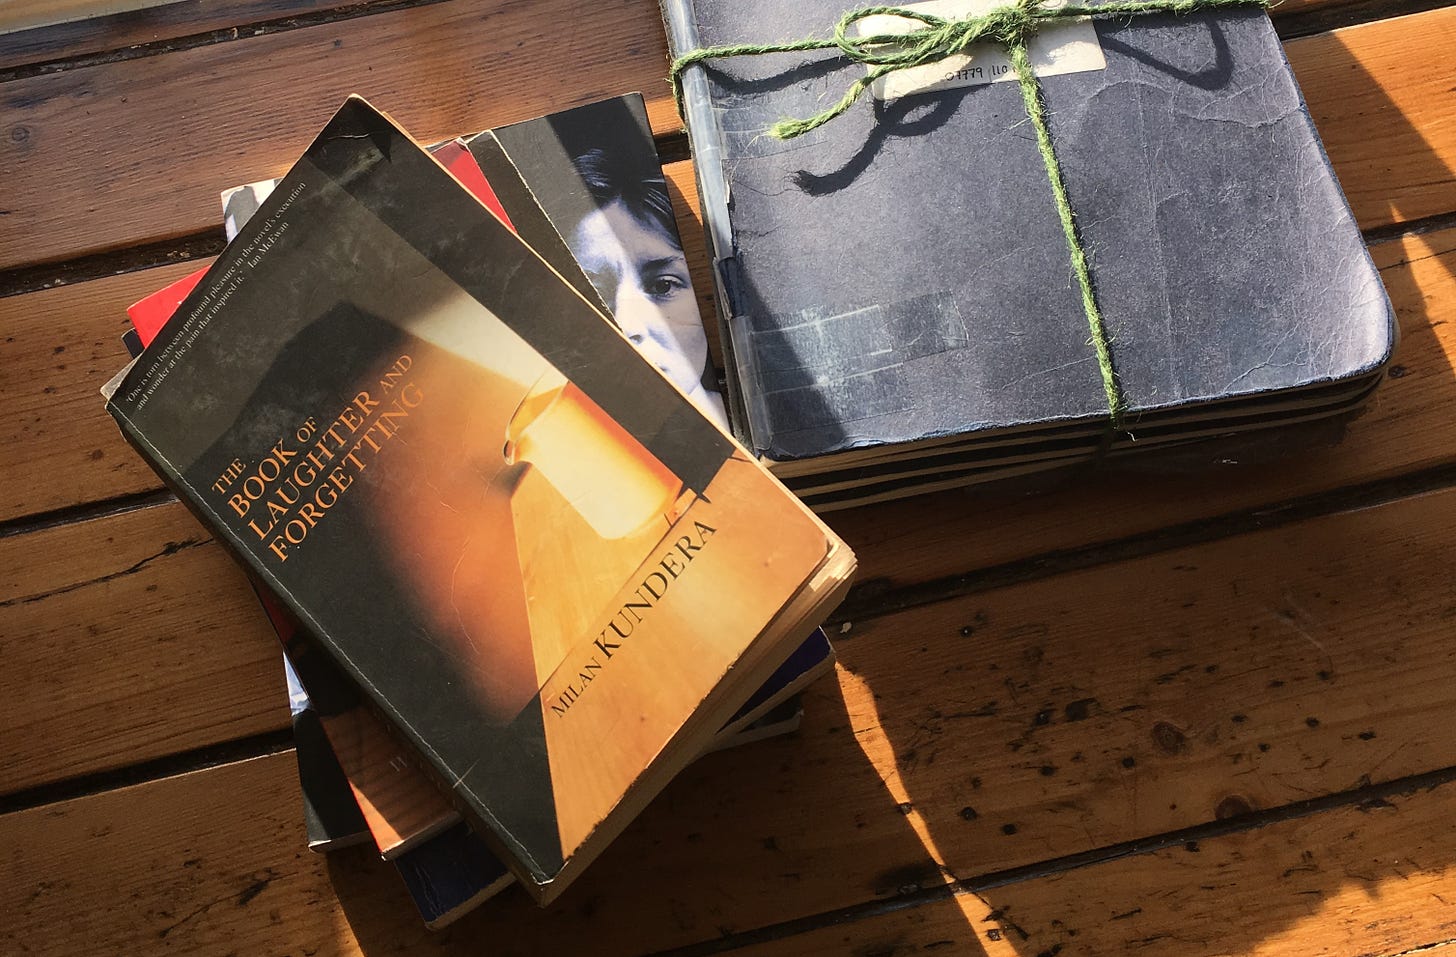 A copy of The Book of Laughter and Forgetting by Milan Kundera on a windowsill, with golden light falling across it